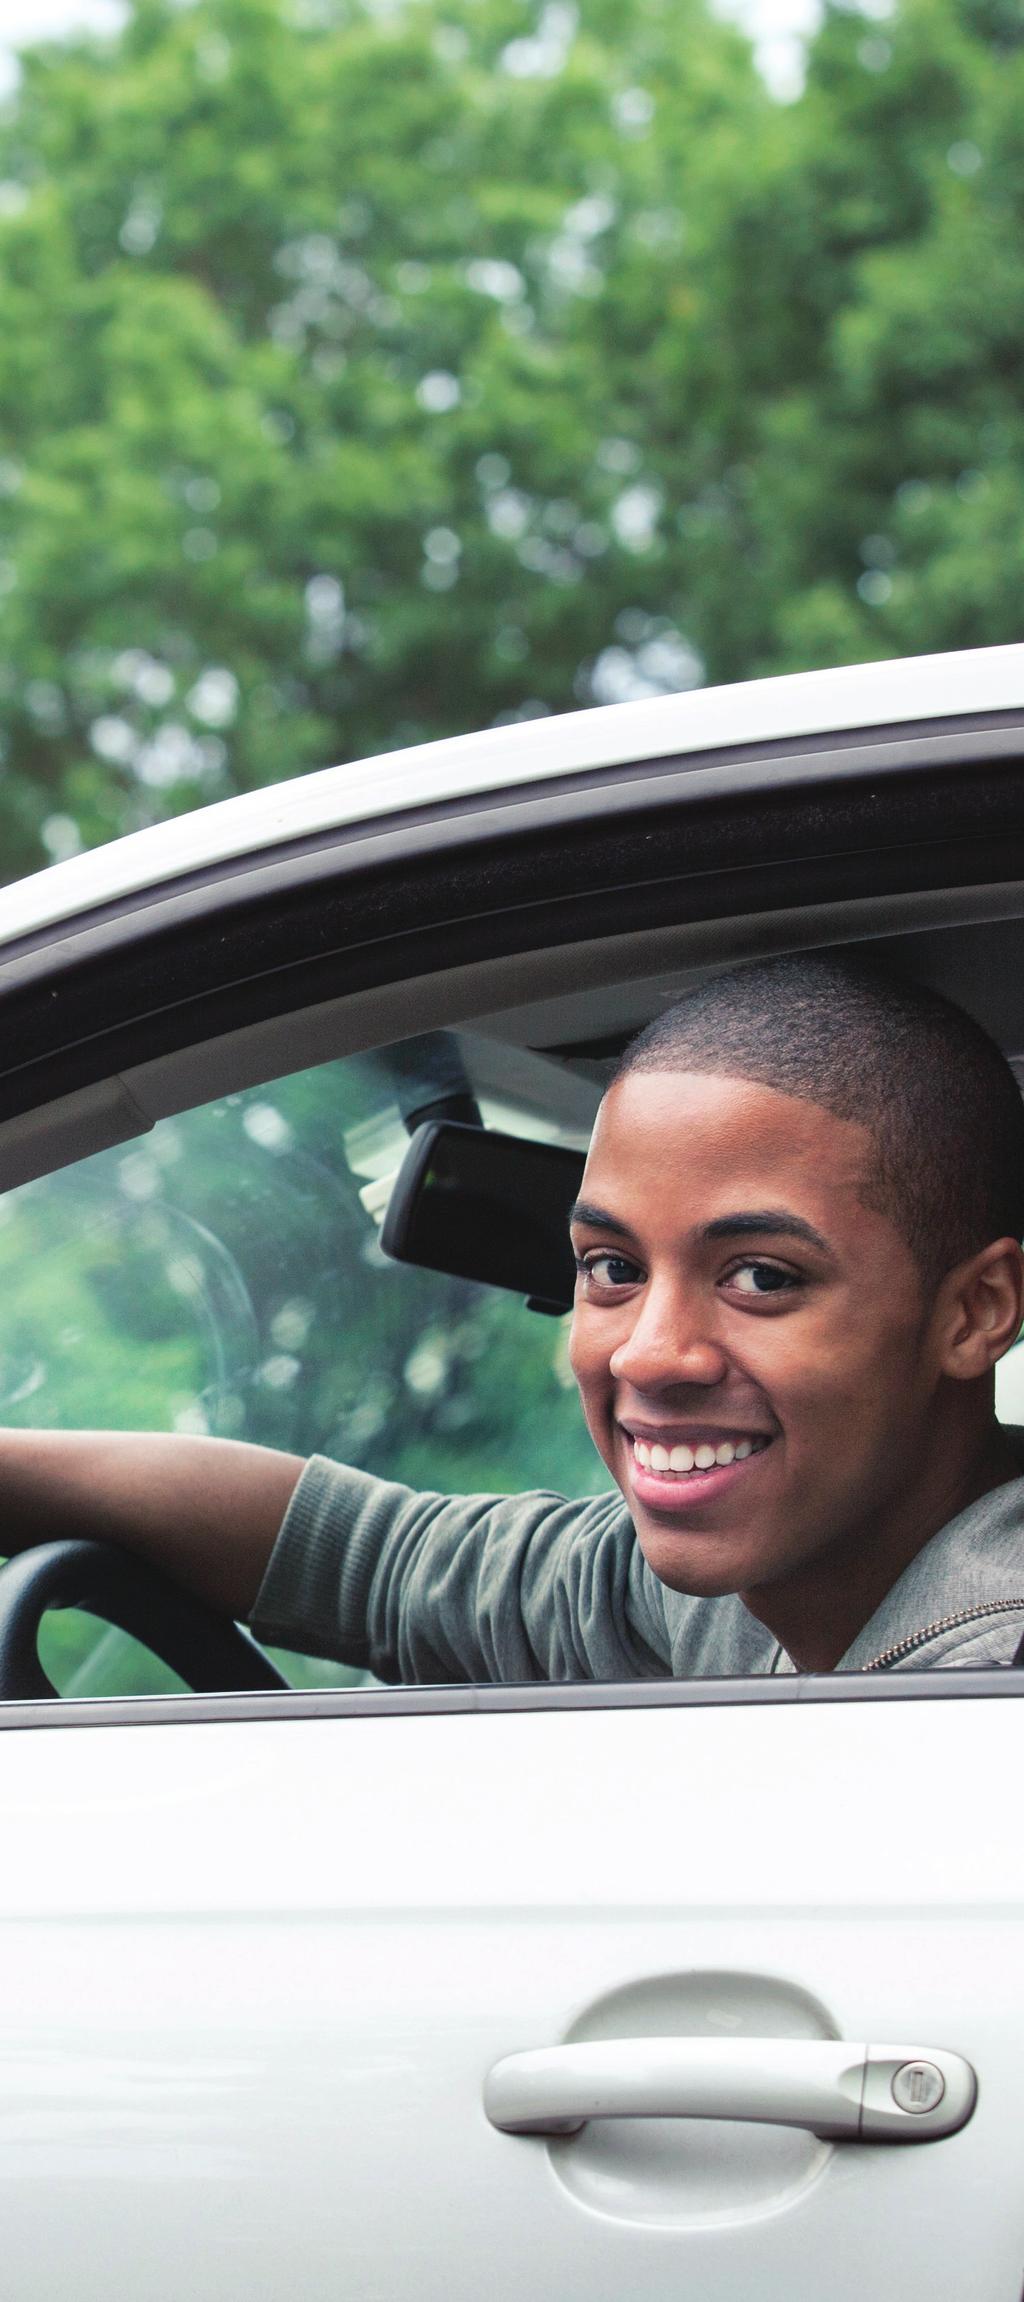 Young drivers are eight times more likely to be involved in a fatal crash than more experienced drivers during the first six months of getting a licence.